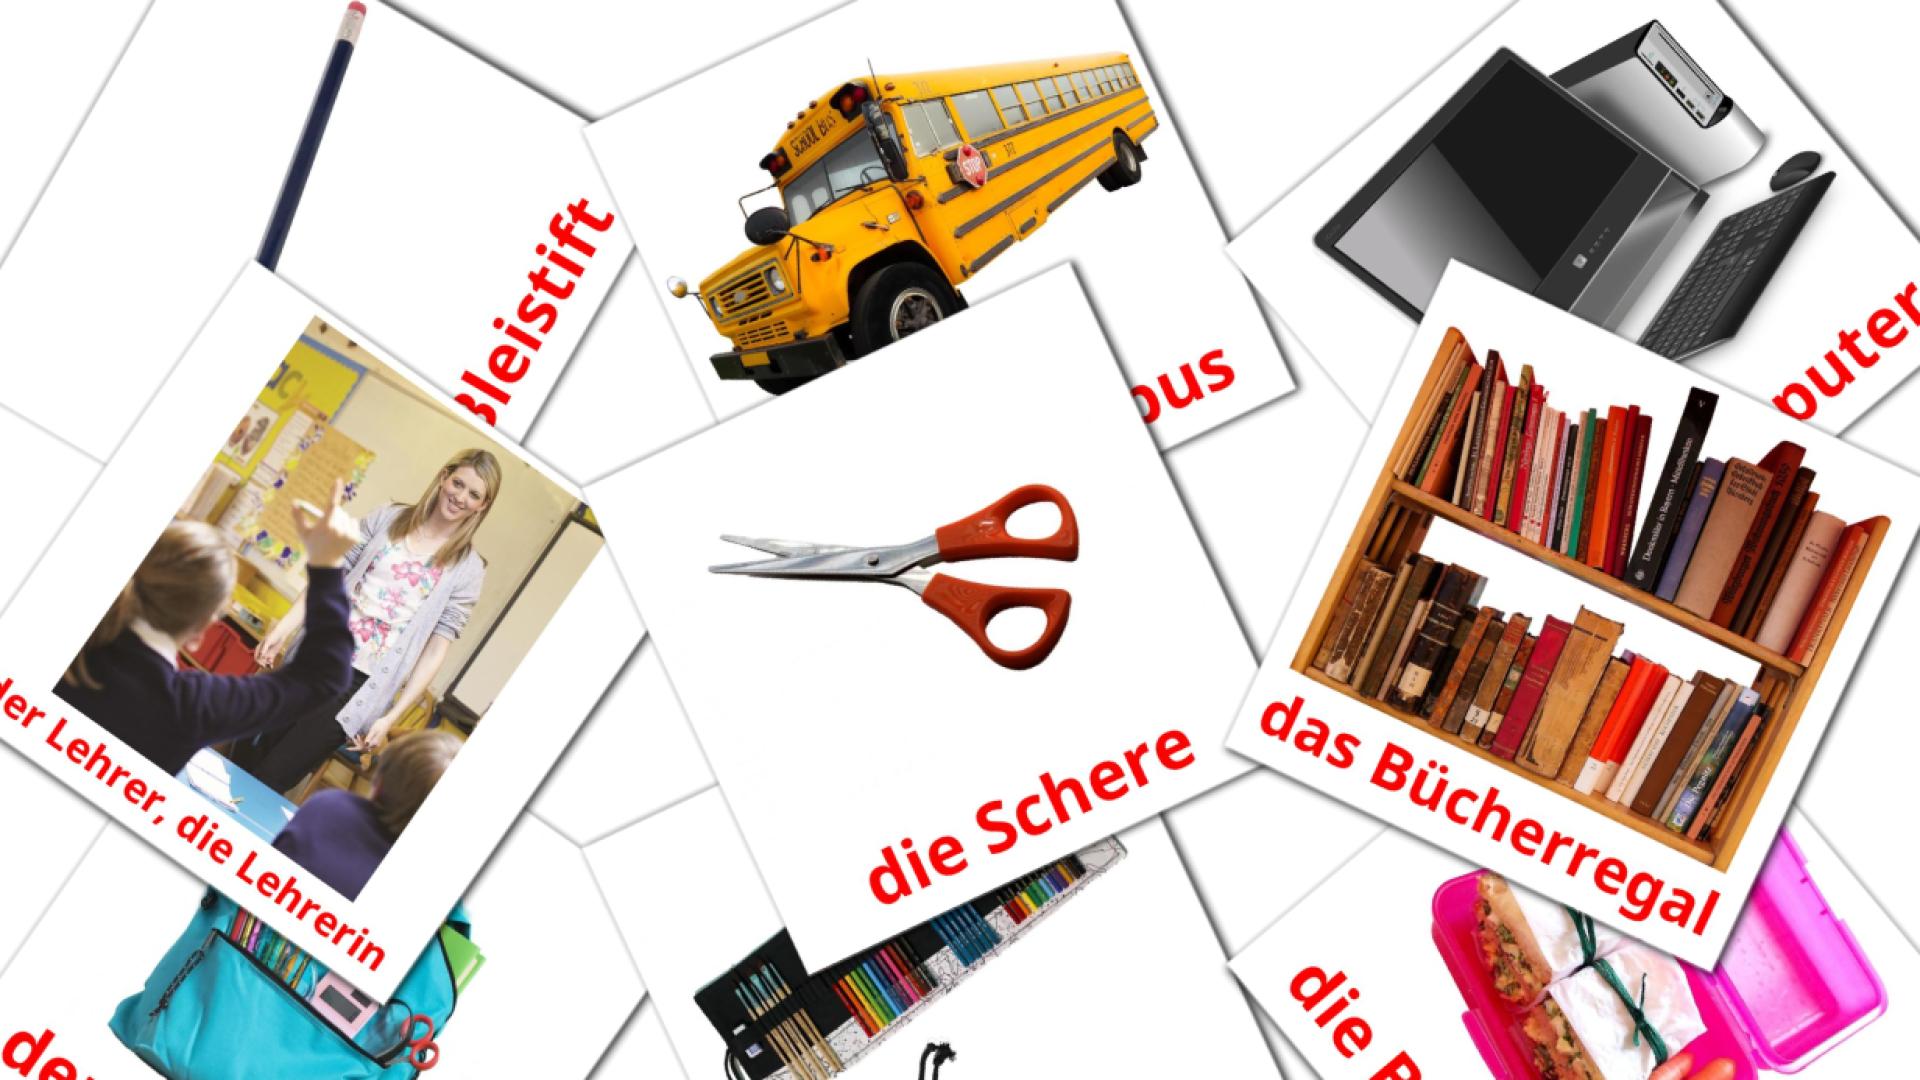 Classroom objects - german vocabulary cards